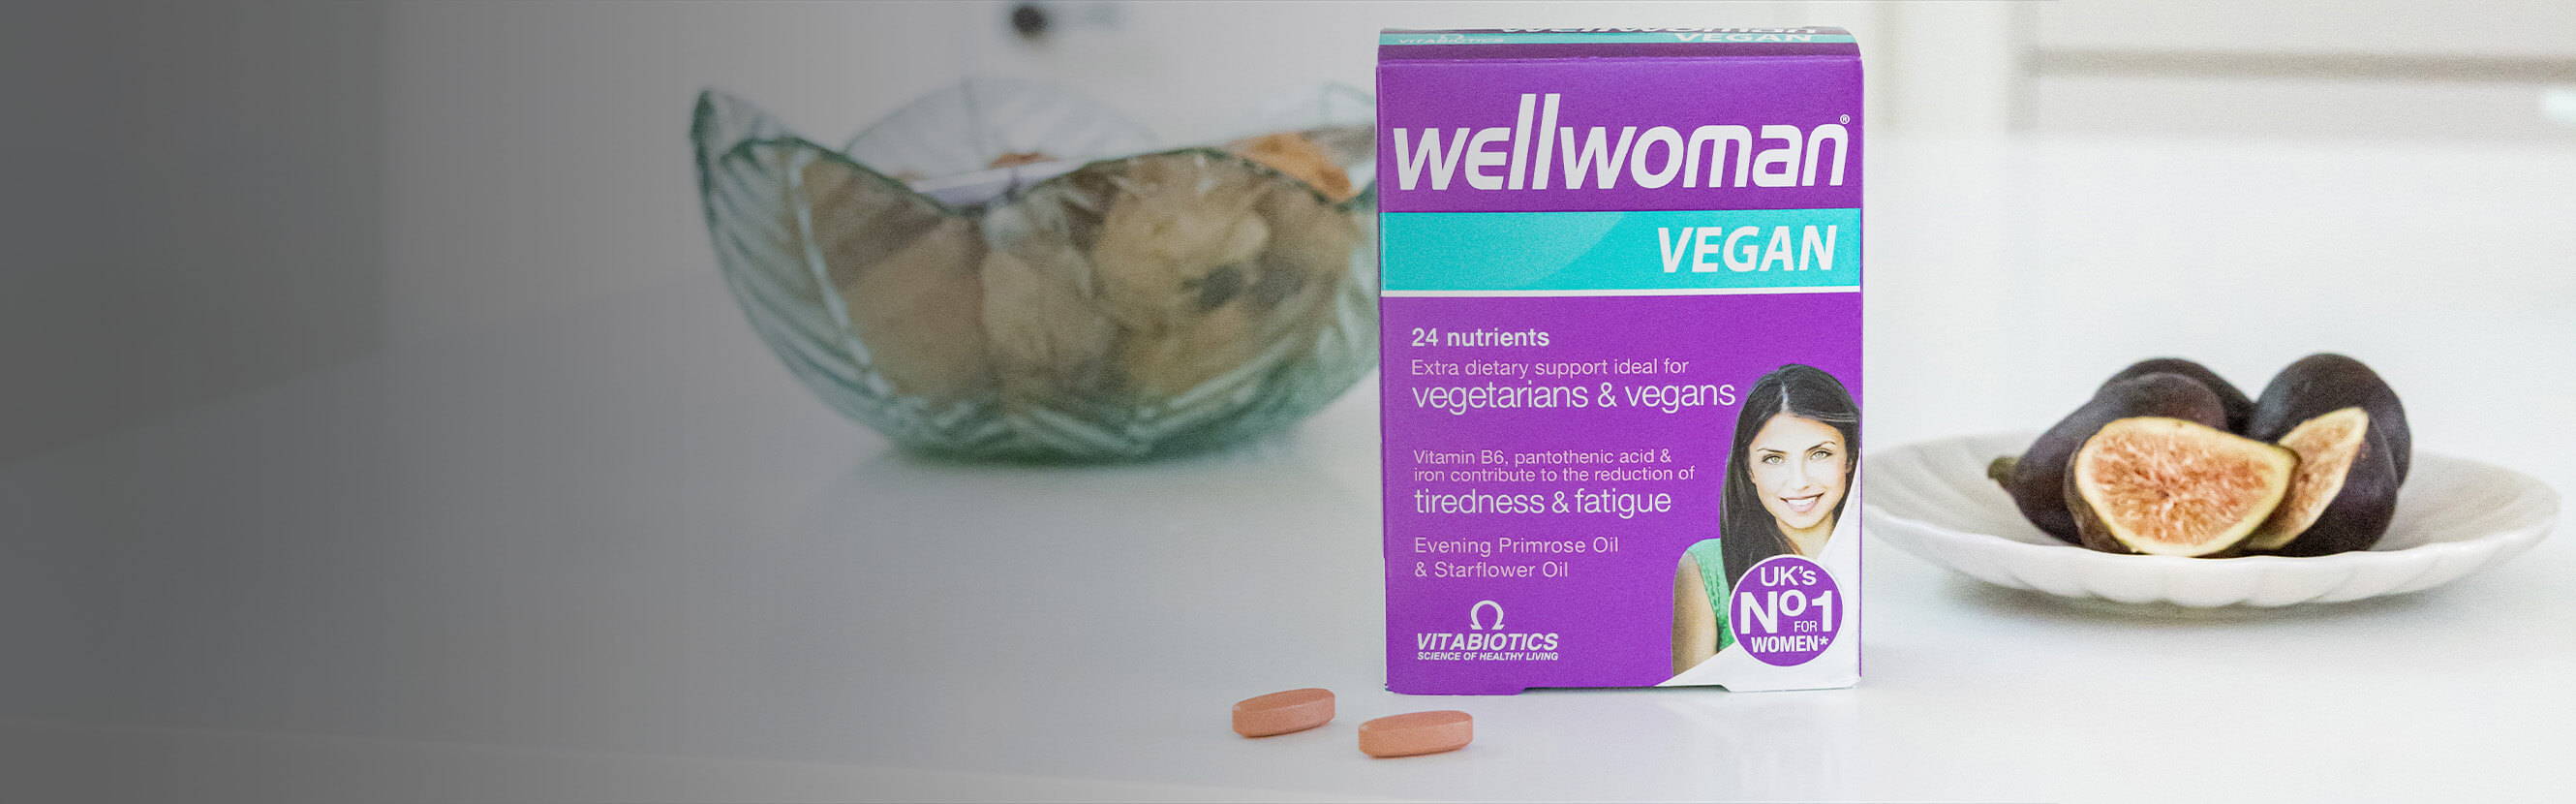  Wellwoman Vegan Pack Next To Vegetables & Nuts 